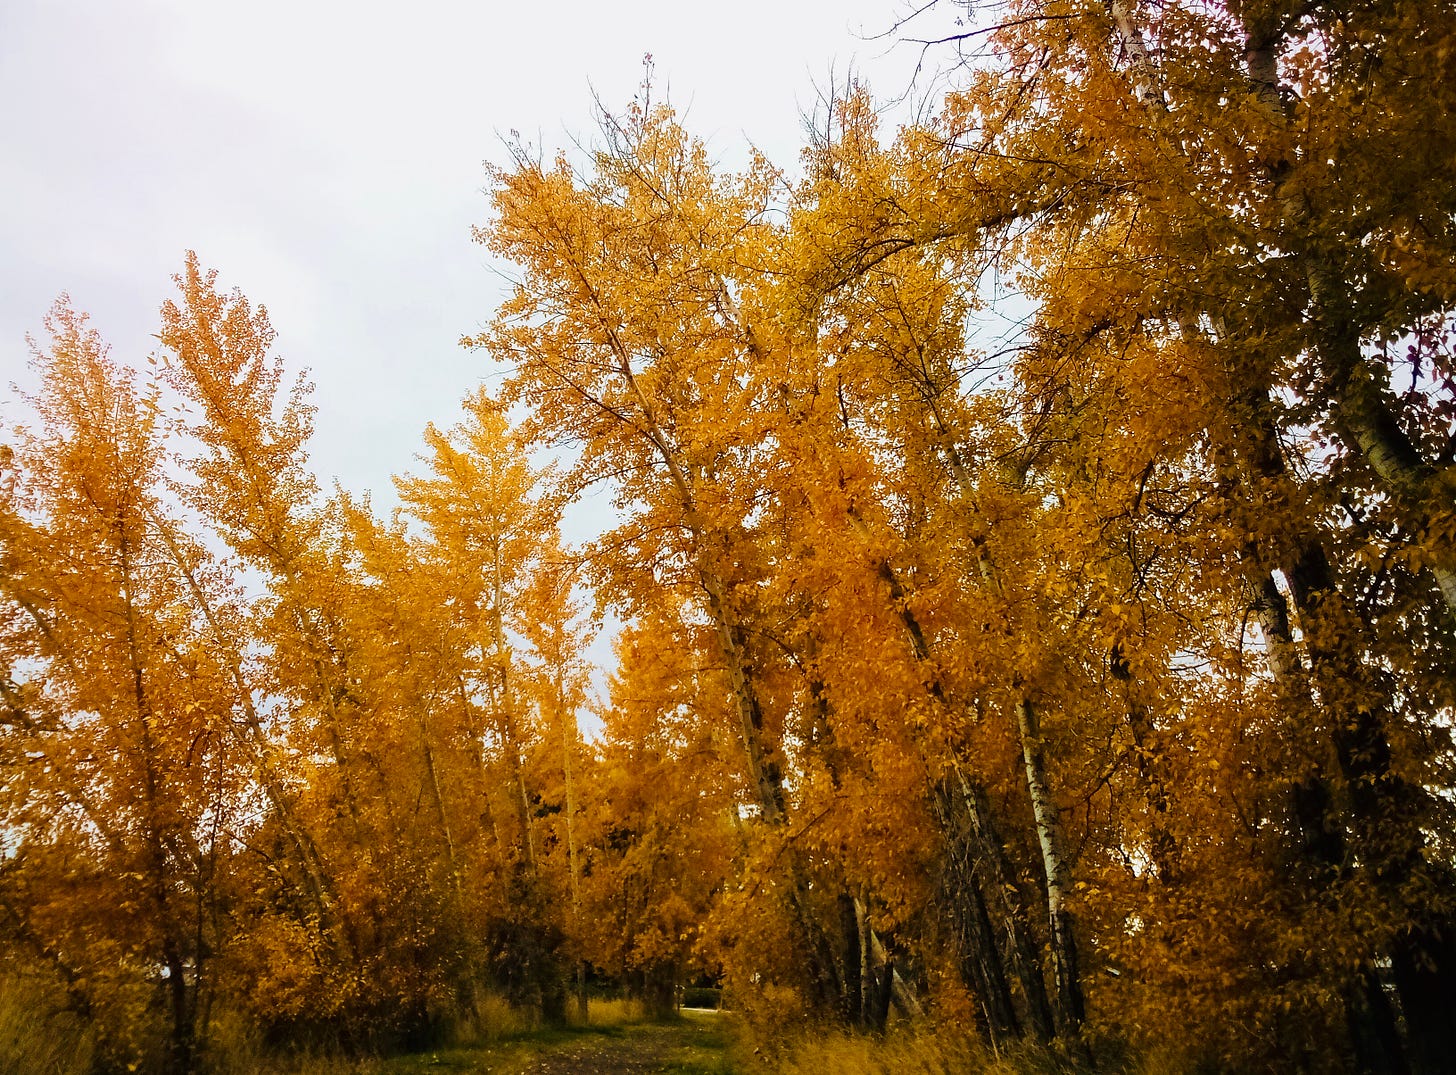 Trees with yellow fall leaves against a cloudy sky